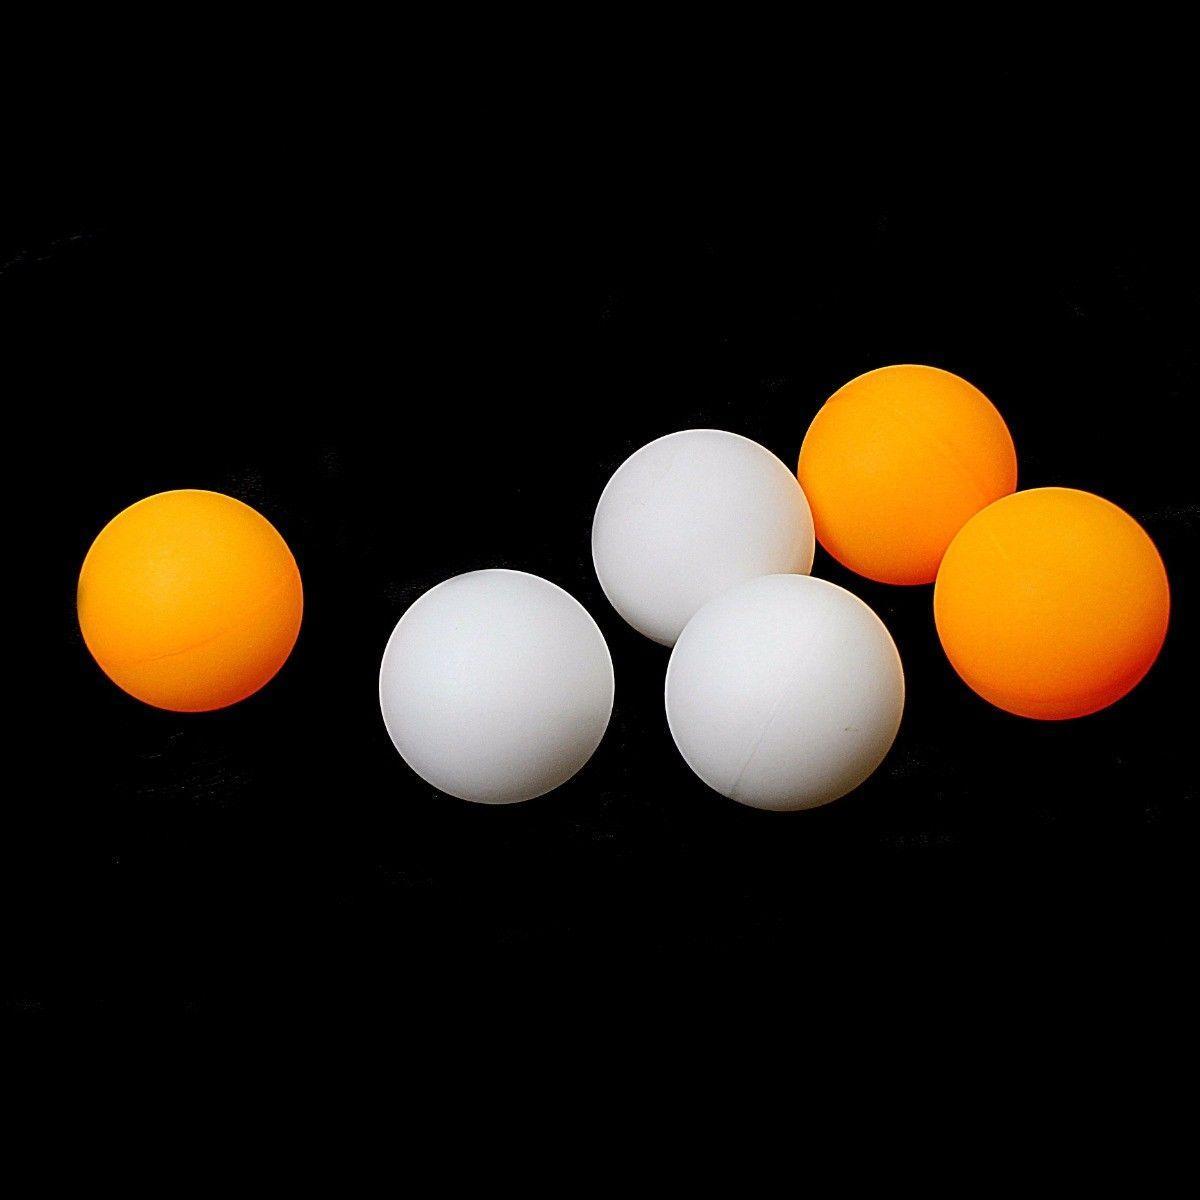 Plastic Table Tennis Ping Pong Balls 3.5 cm Pack of 6 Orange and White 0379 (Parcel Rate)